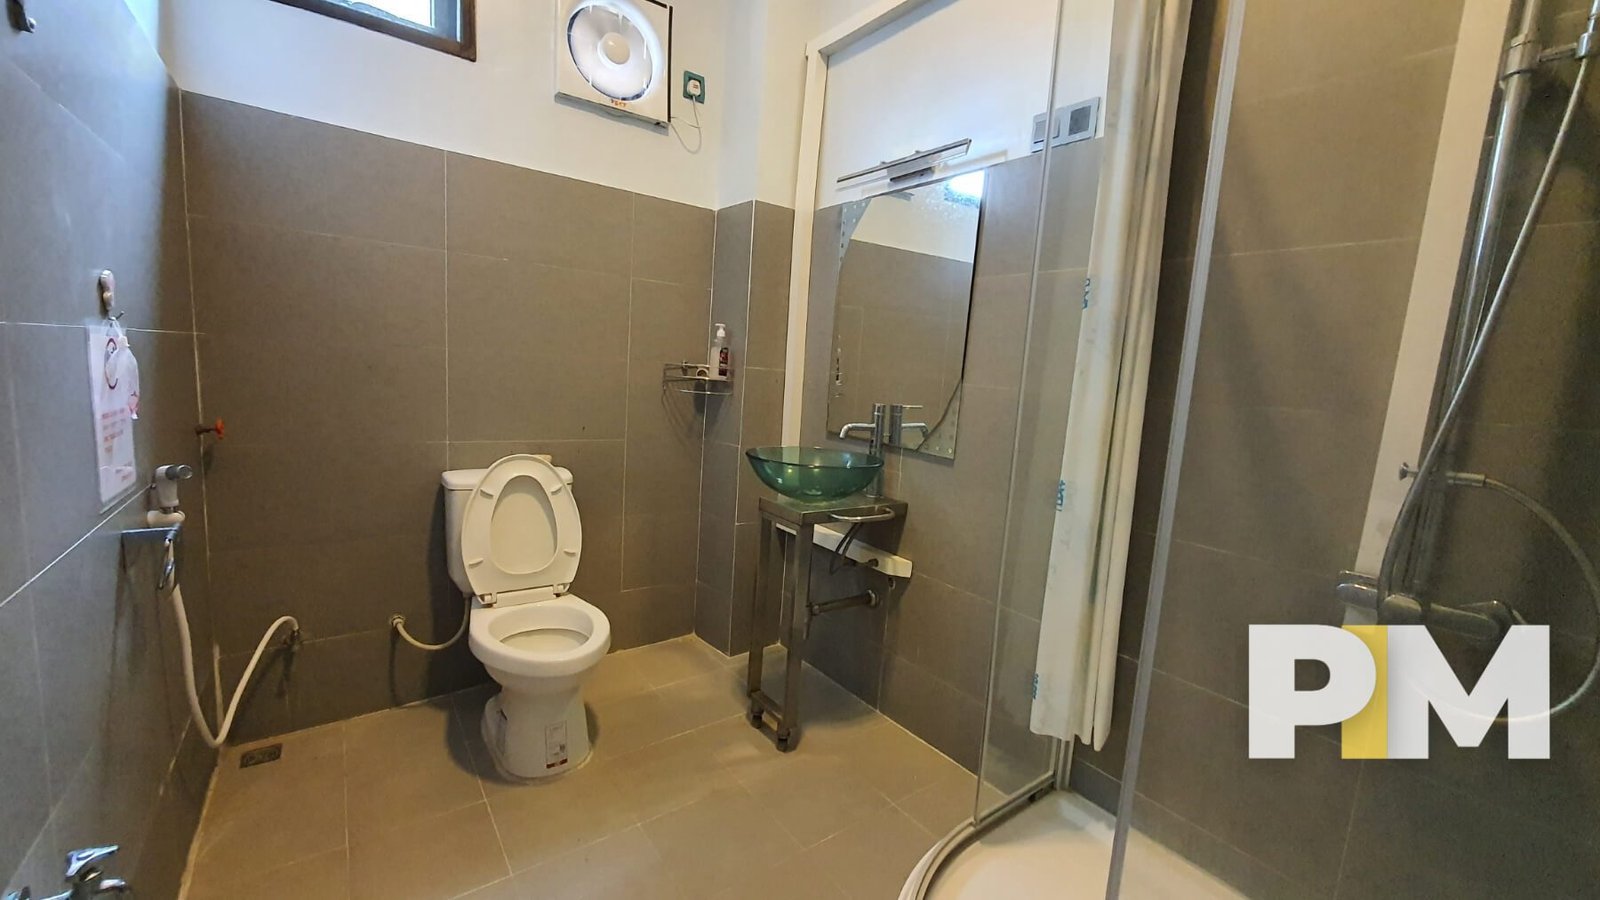 Tiolet room with sink - Yangon Real Estate